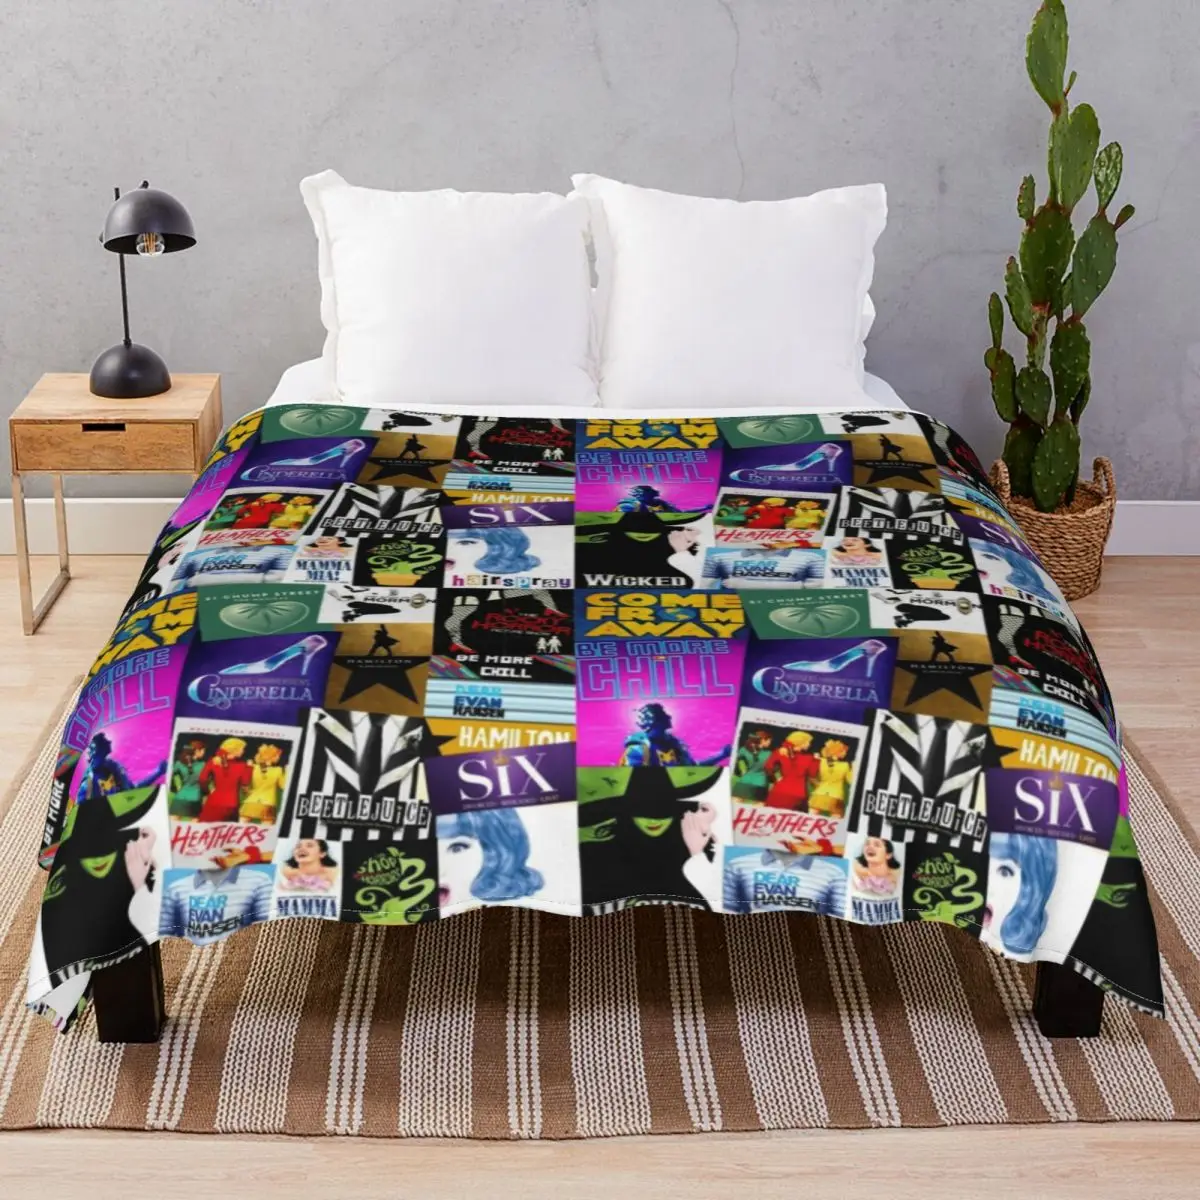 Musicals Collage Blankets Coral Fleece Plush Decoration Multifunction Unisex Throw Blanket for Bed Home Couch Camp Office